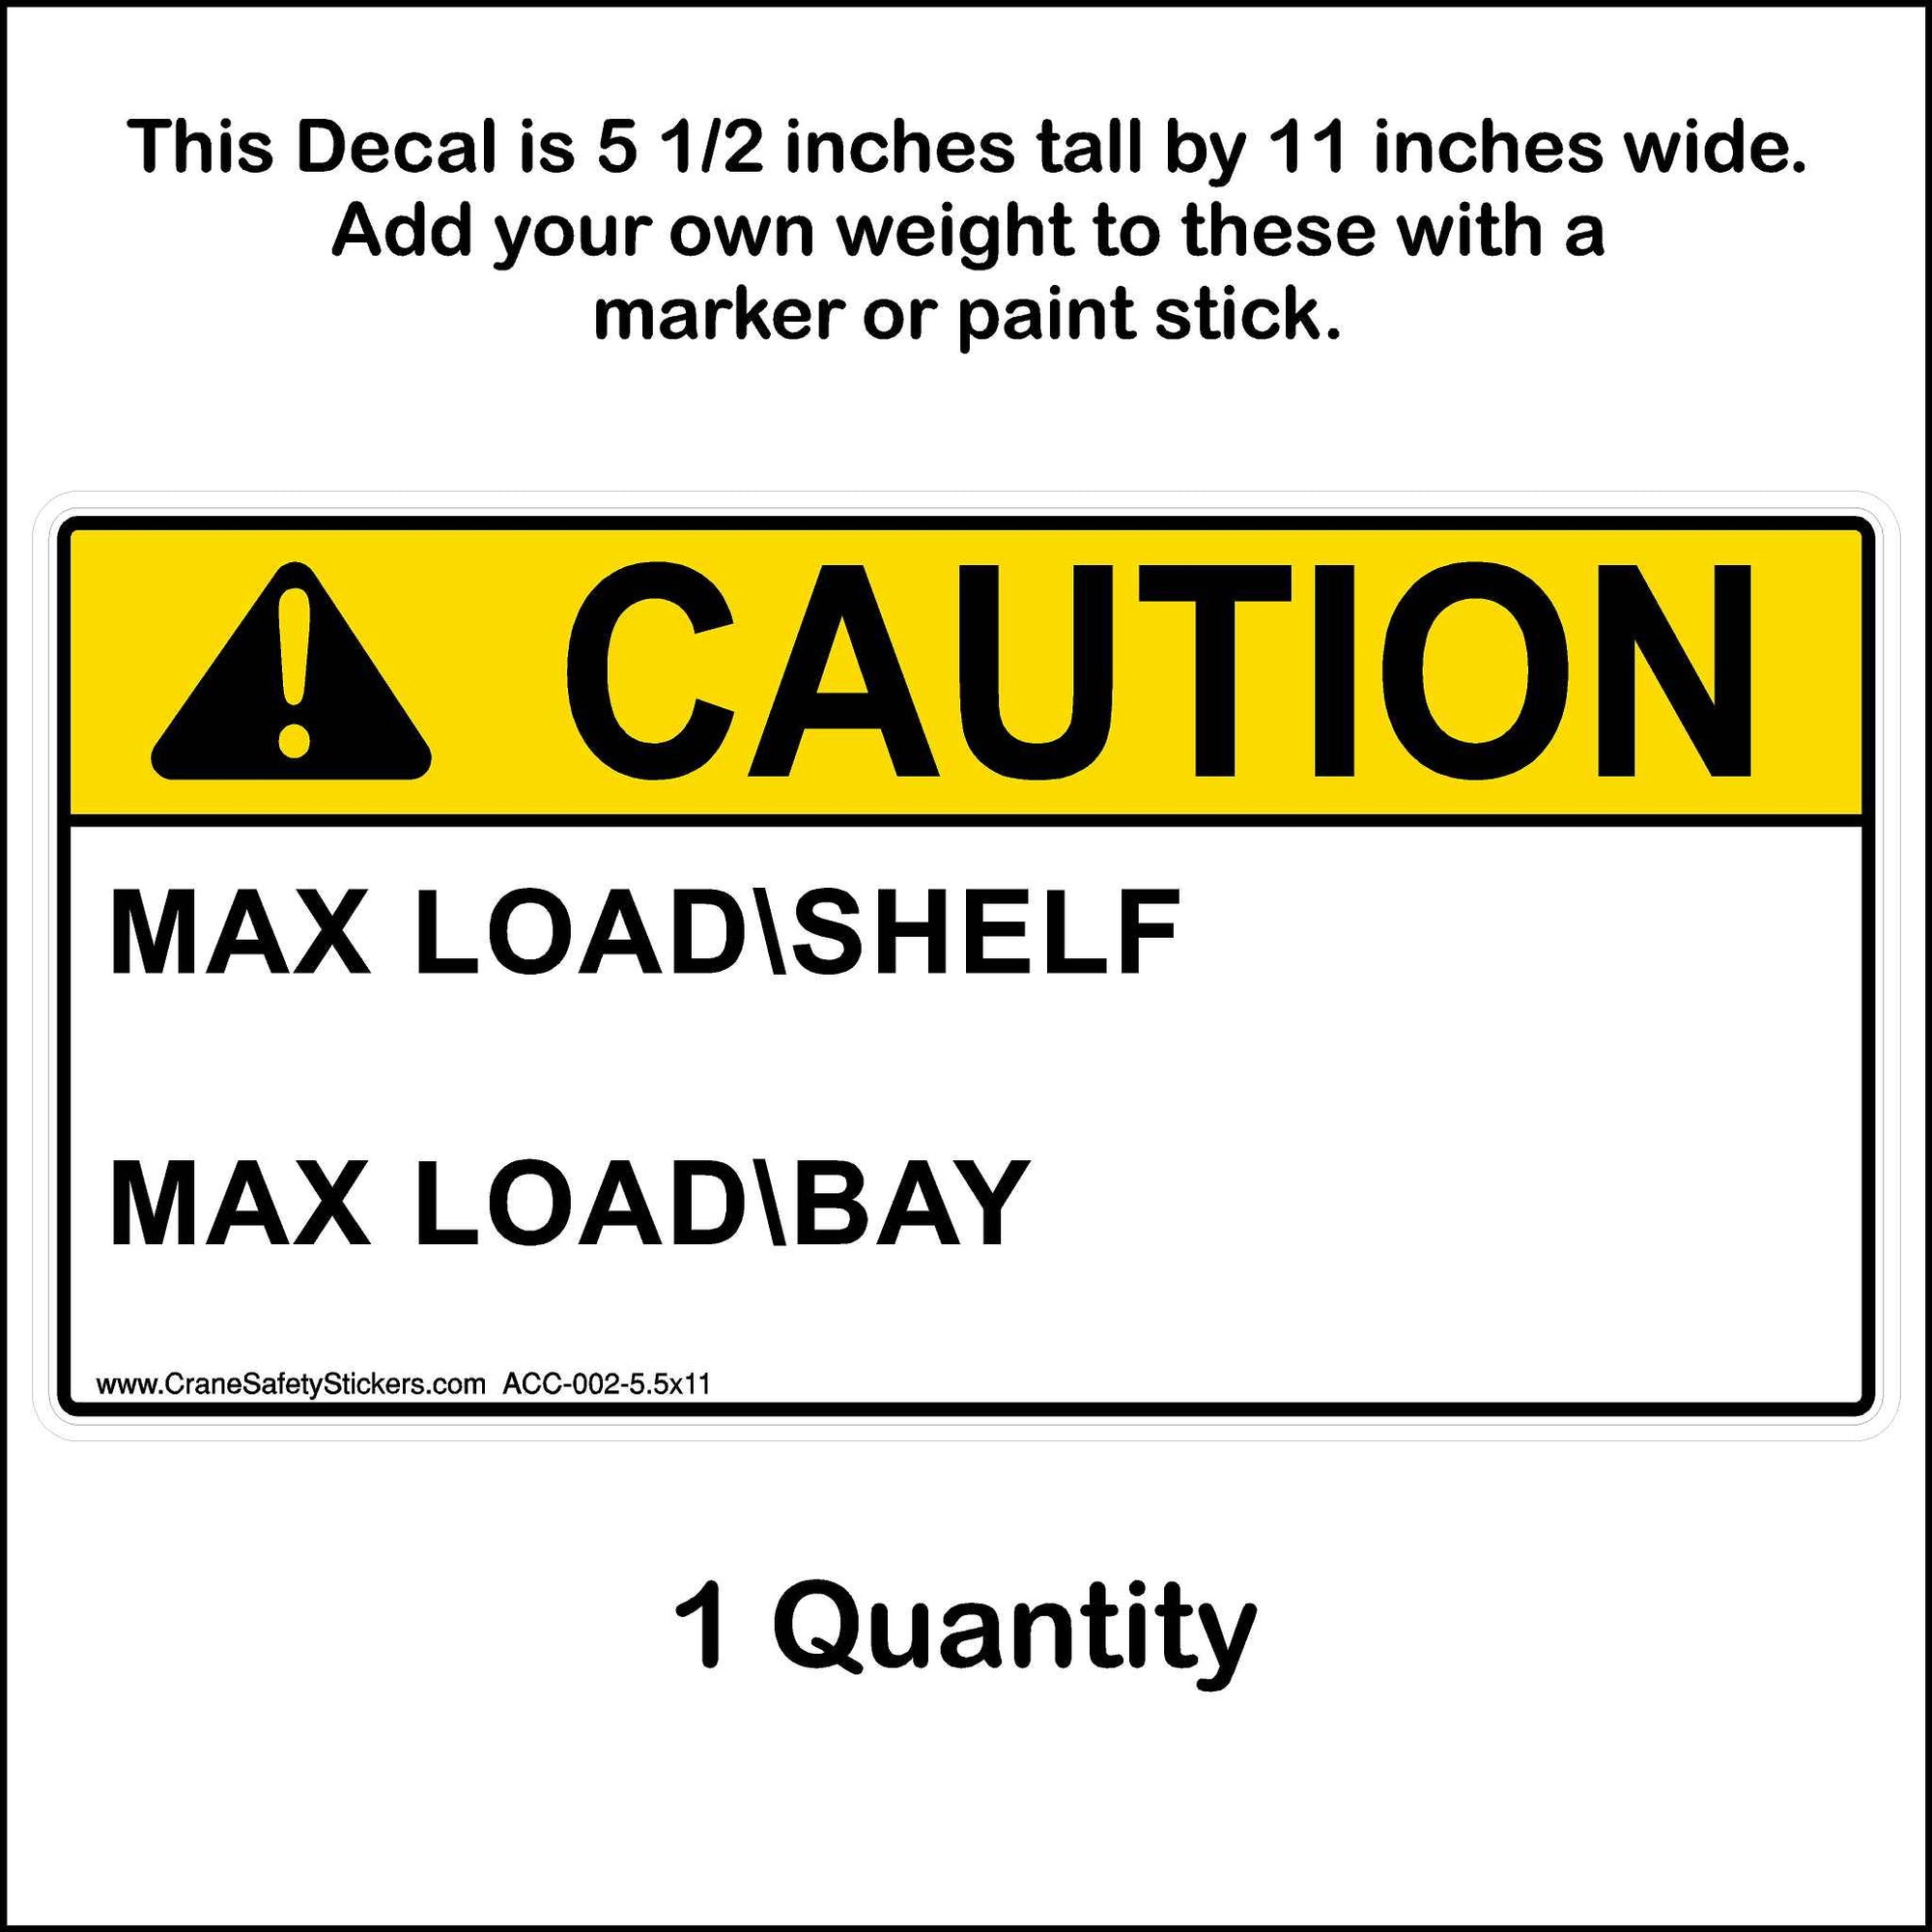 5 1/2 by 11 inch Max load shelf and max load bay sticker